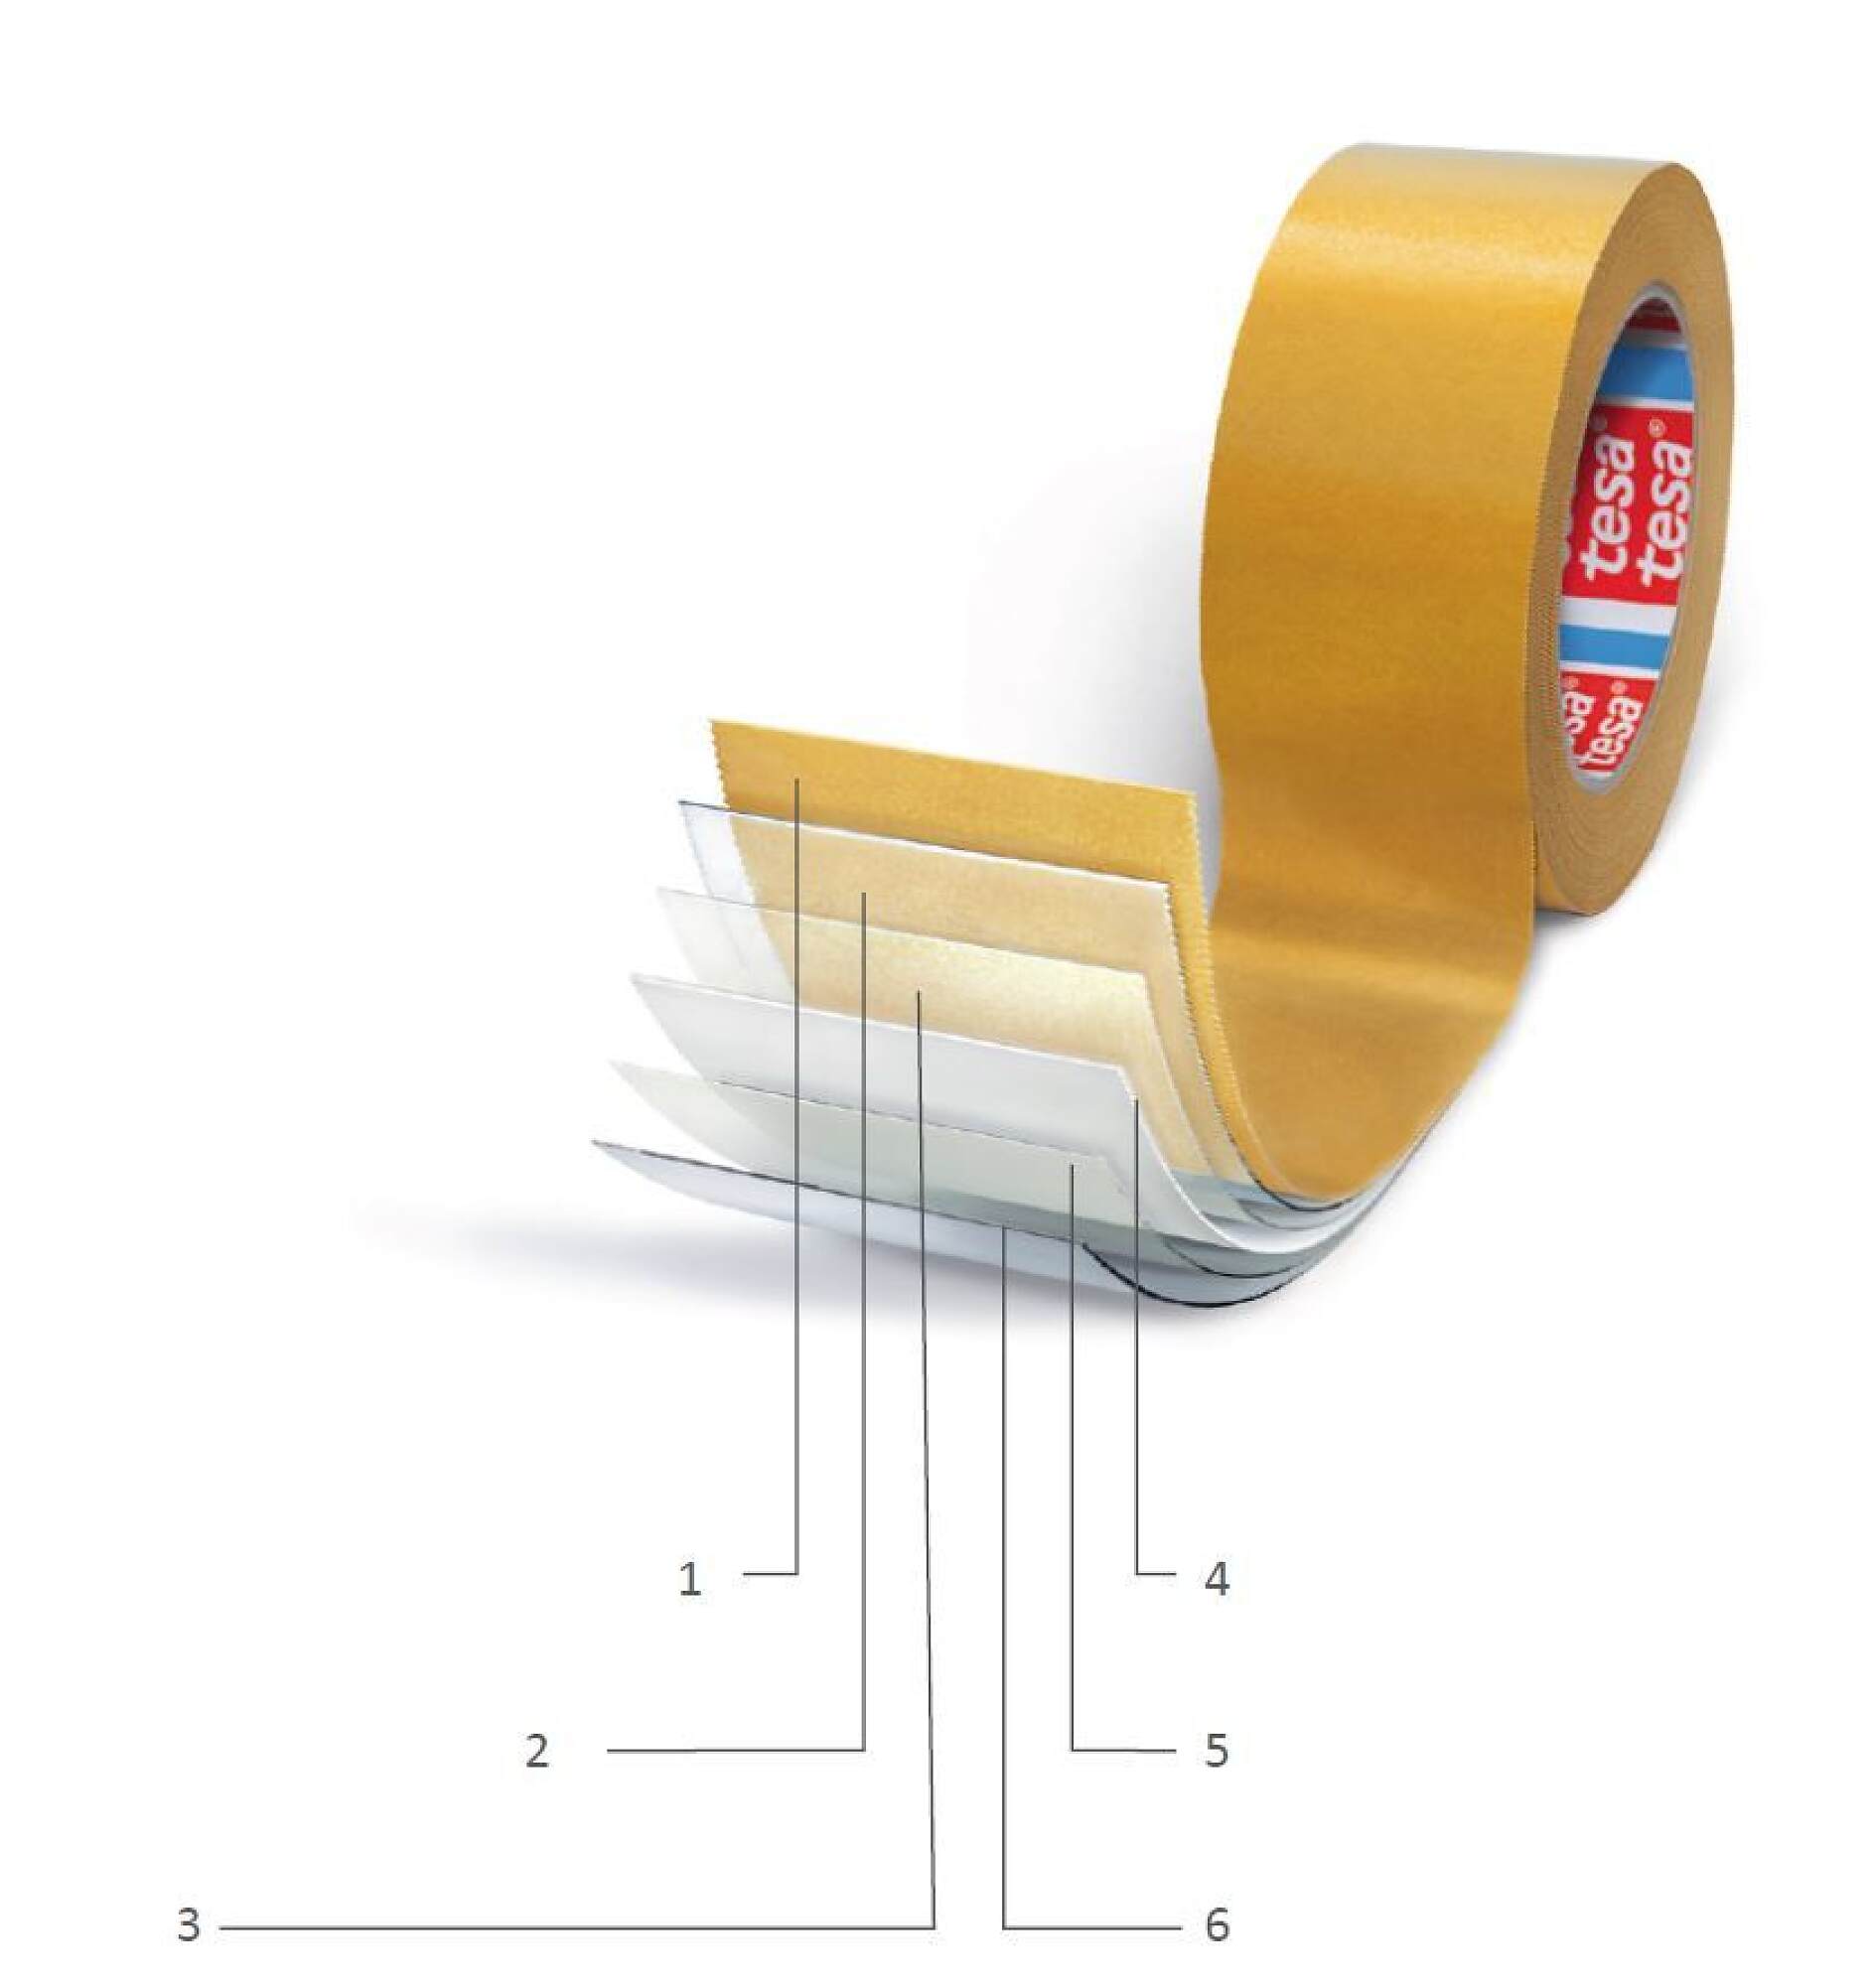 Double-sided tape - Wikipedia